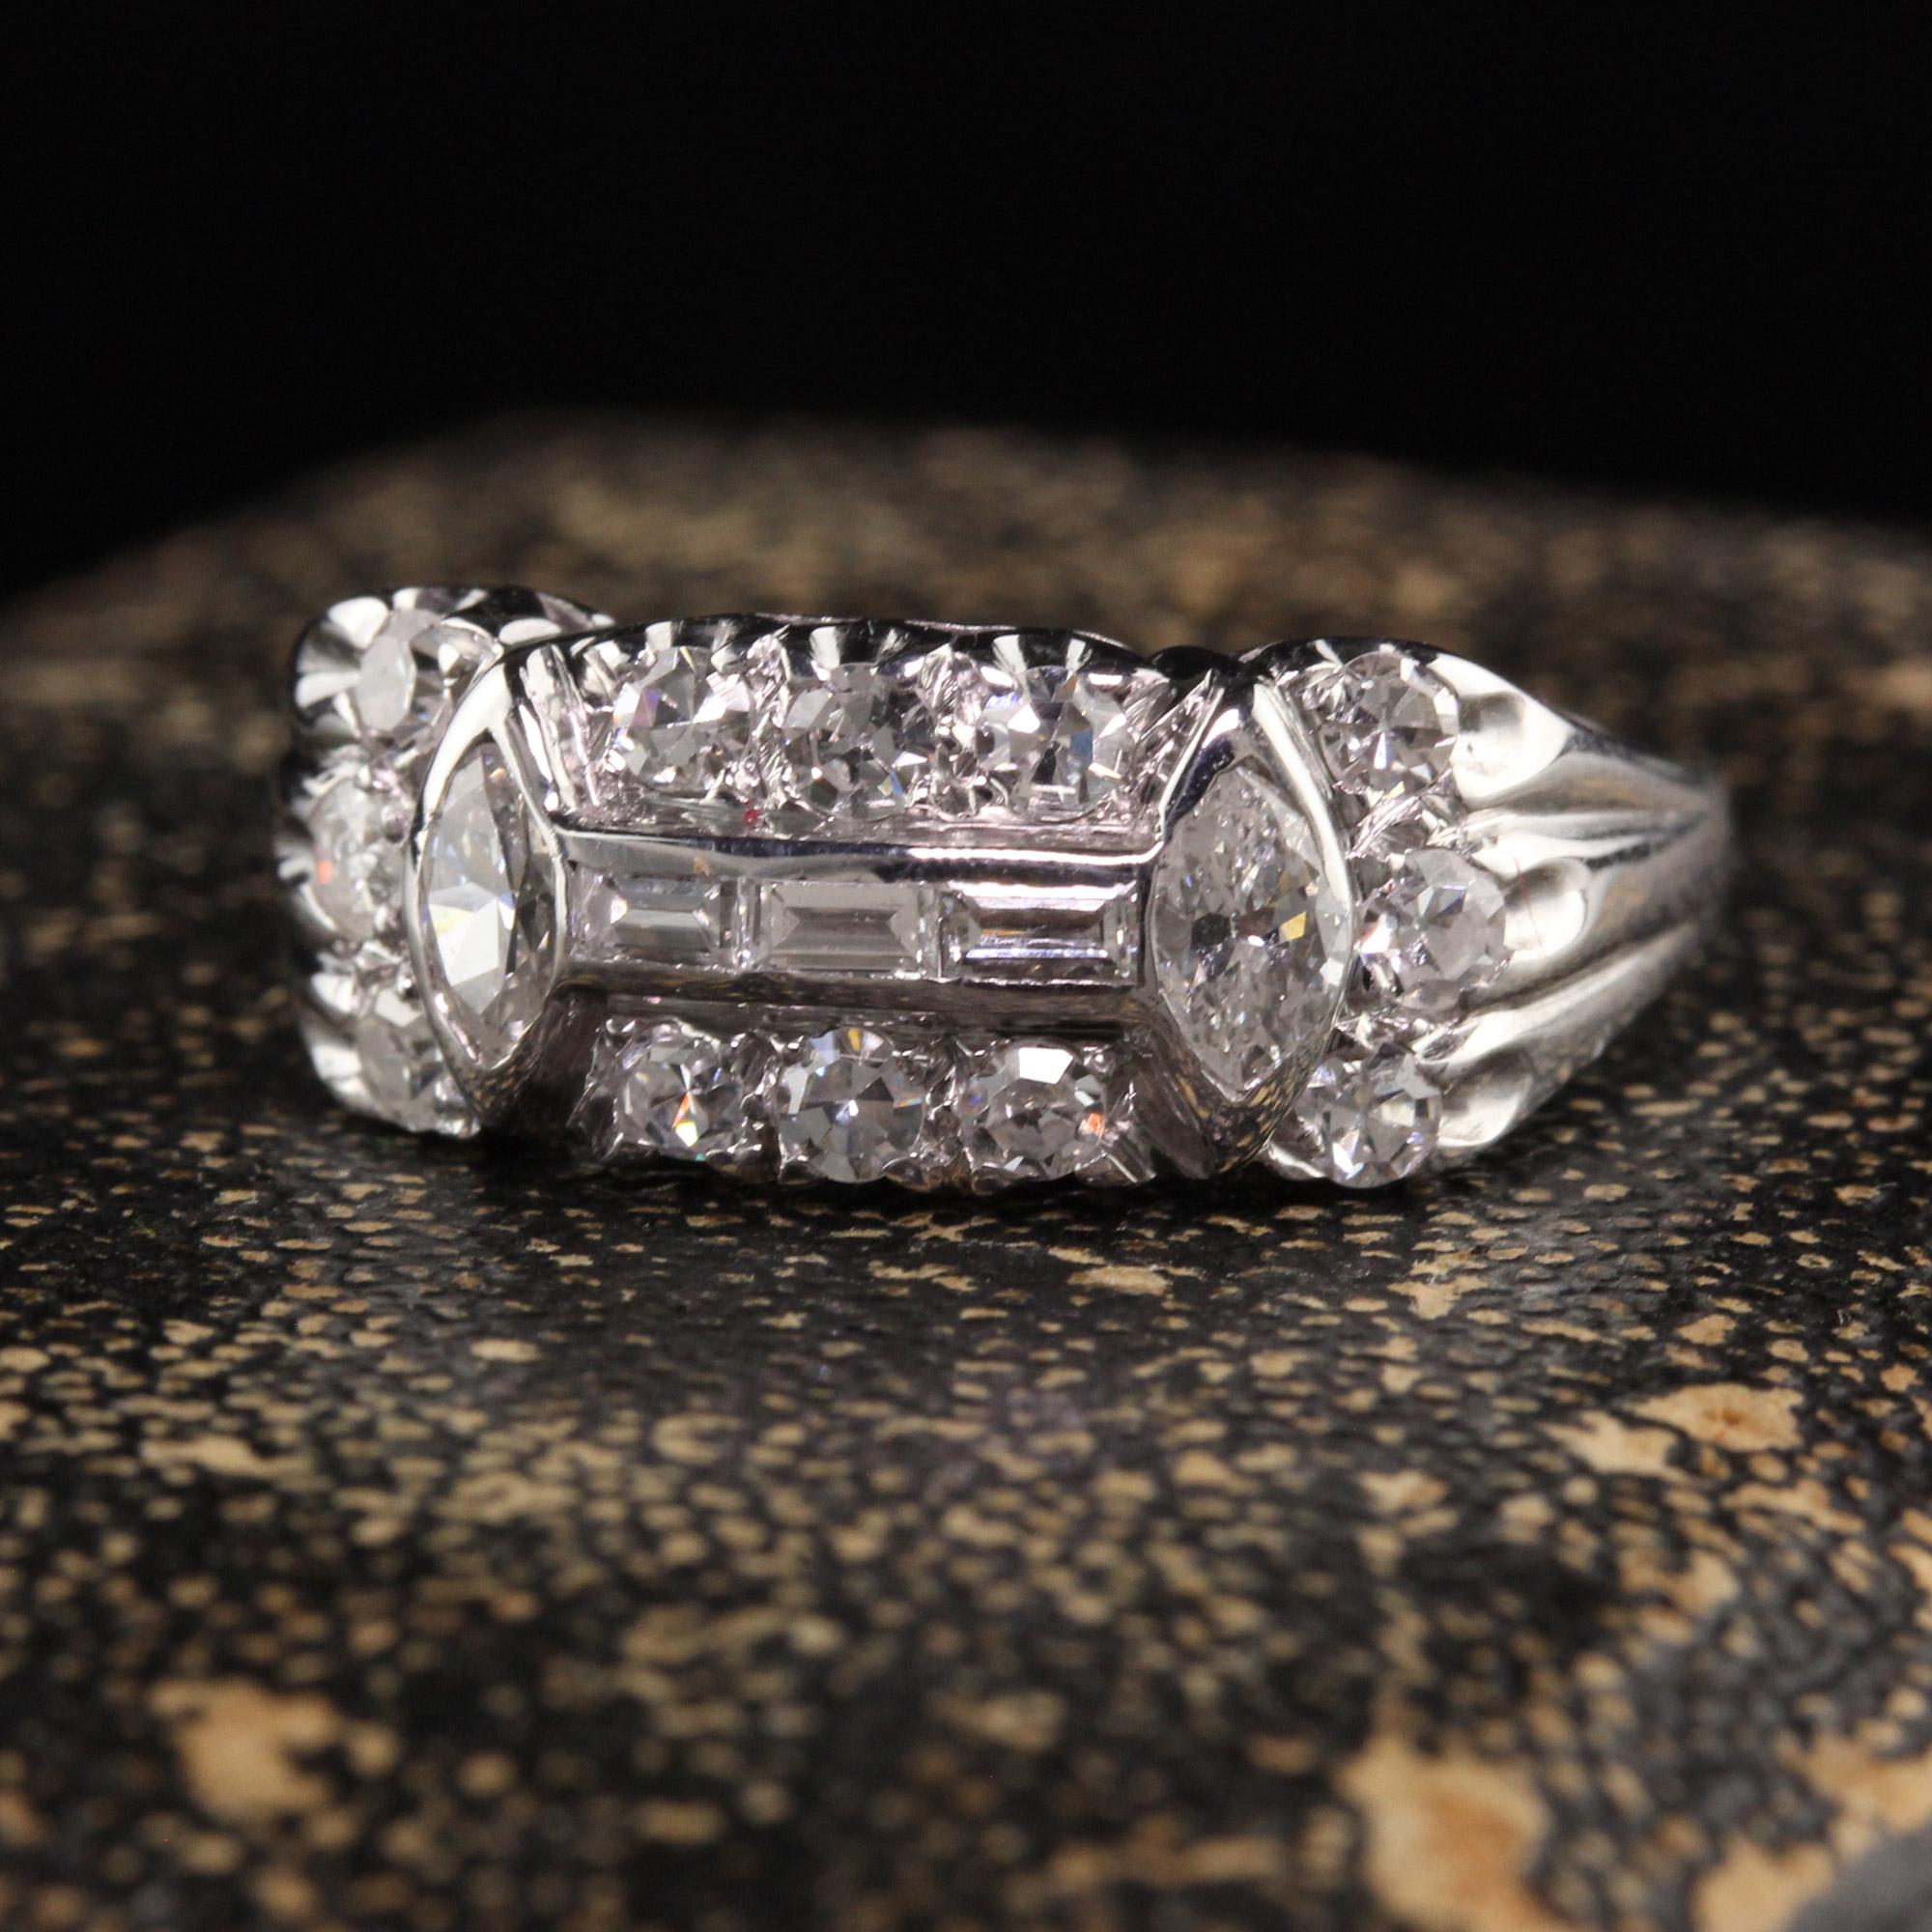 Beautiful Antique Art Deco 18K White Gold Marquise and Baguette Diamond Wedding Band. This beautiful ring is crafted in 18k white gold. The band has marquise, single cut diamonds, and baguettes in a gorgeous design.

Item #R1251

Metal: 18K White